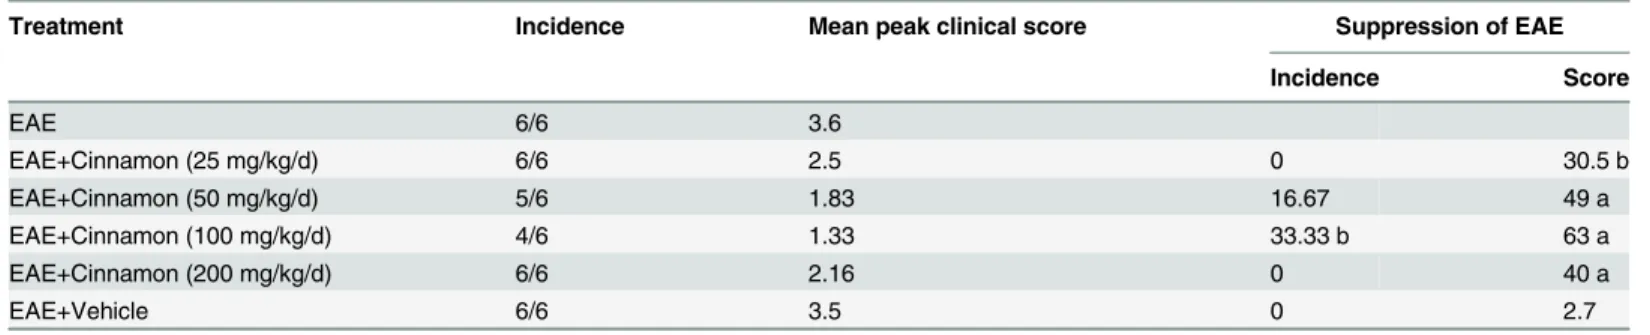 Table 1. Effect of cinnamon on clinical symptoms of EAE in PLP-TCR Tg mice.